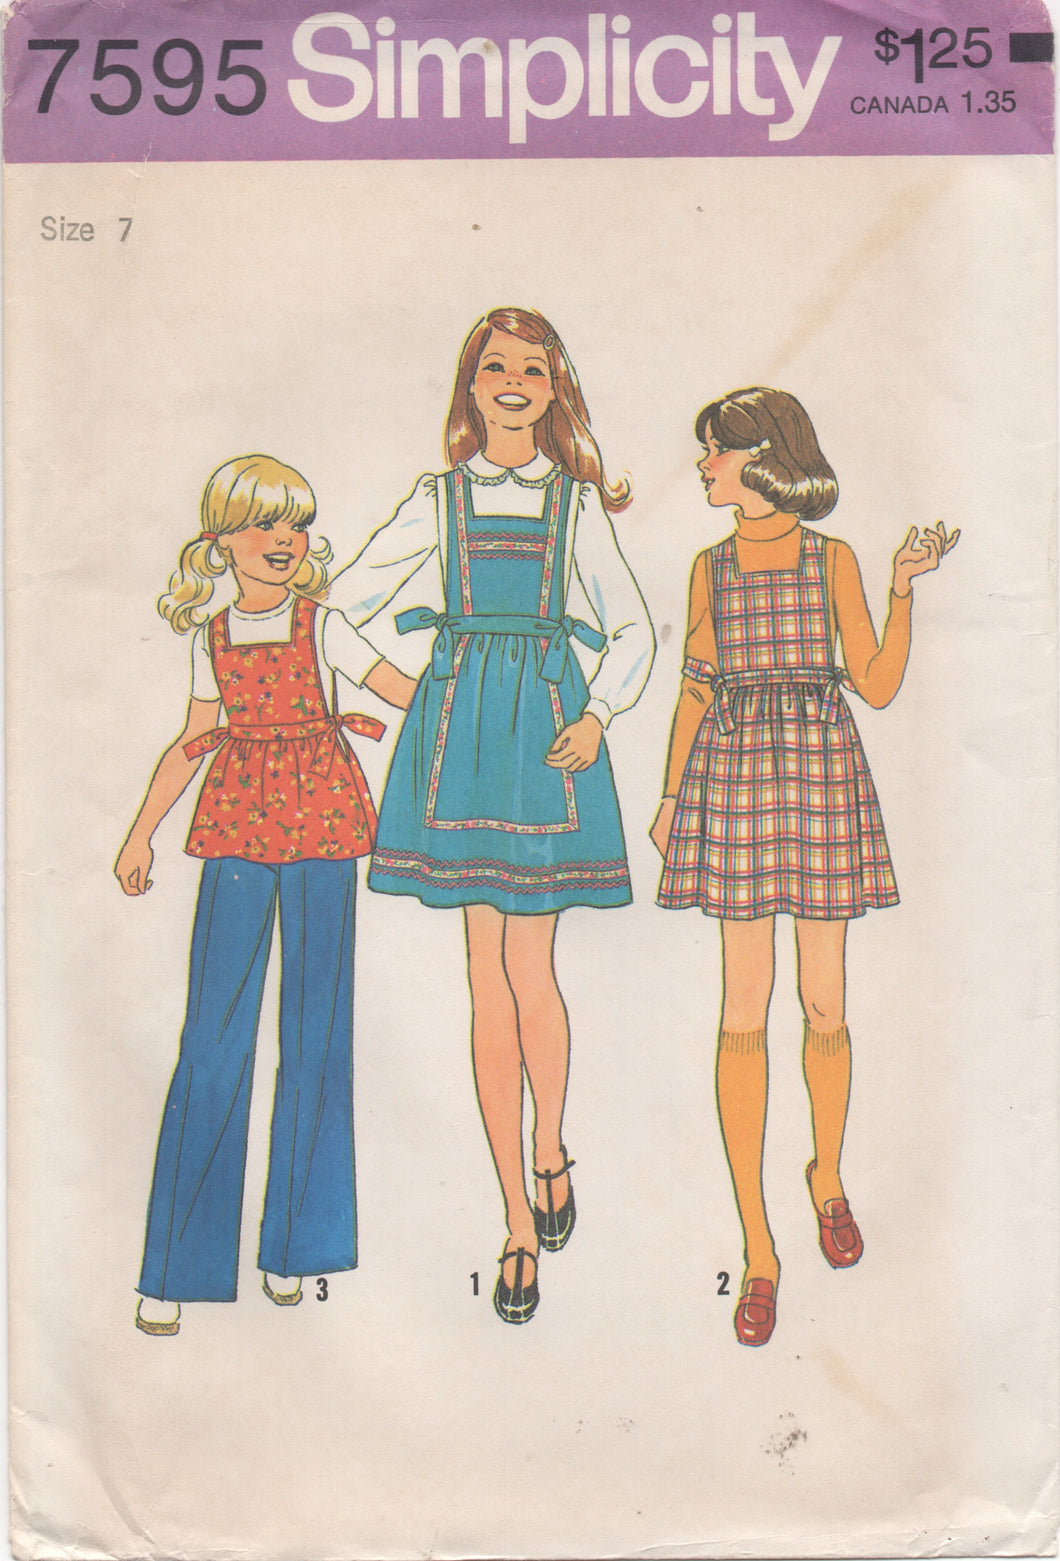 1970's Simplicity Jumper Dress and Pants Pattern - Chest 26